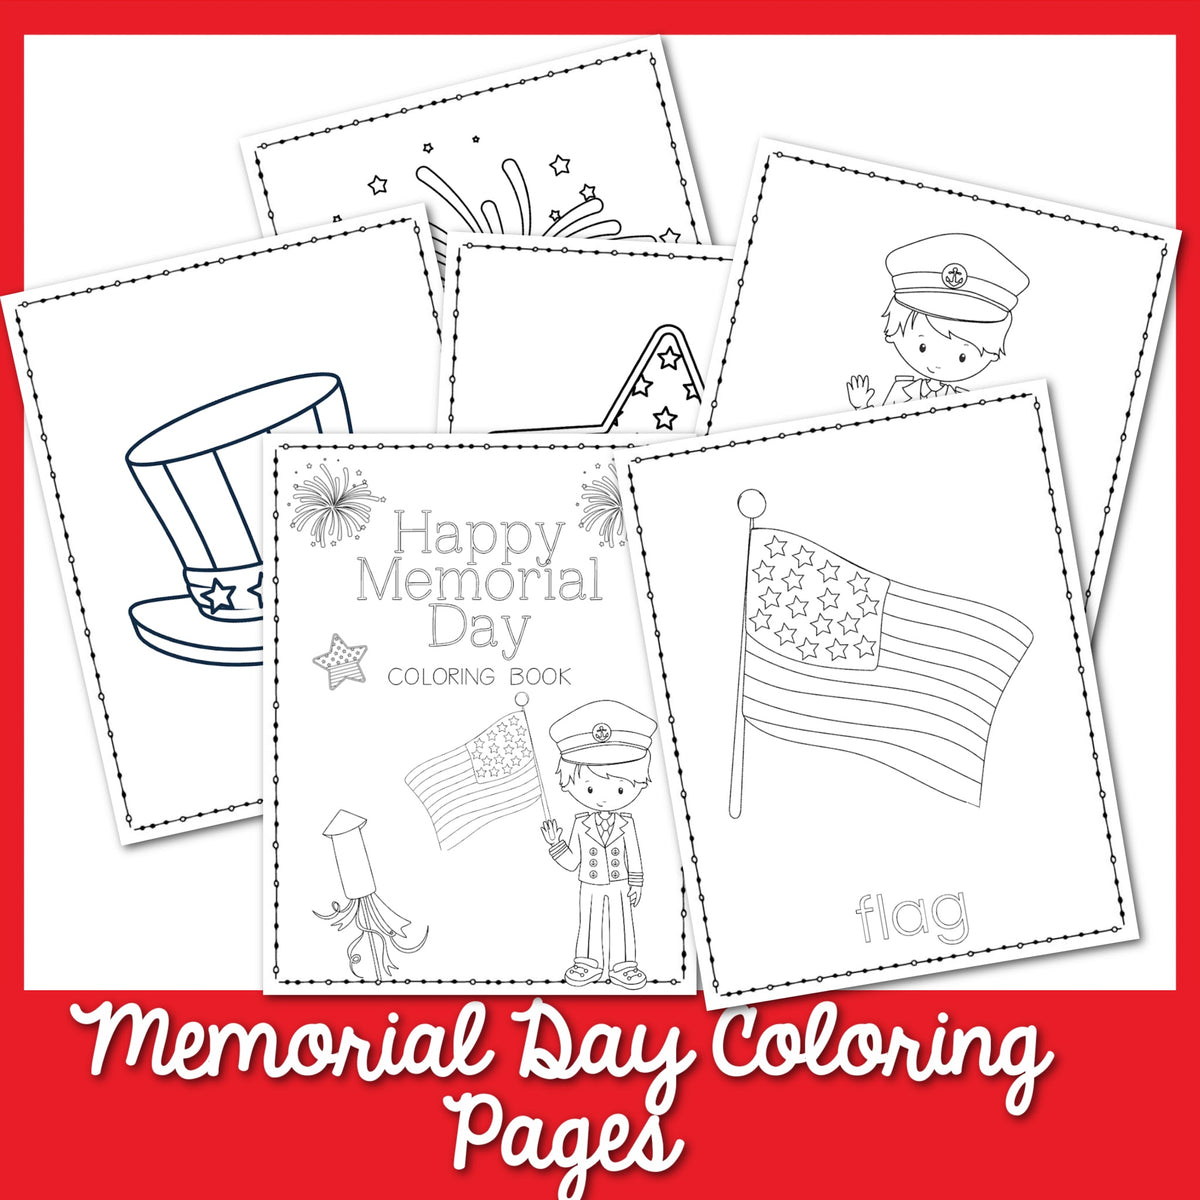 Memorial day coloring pages â